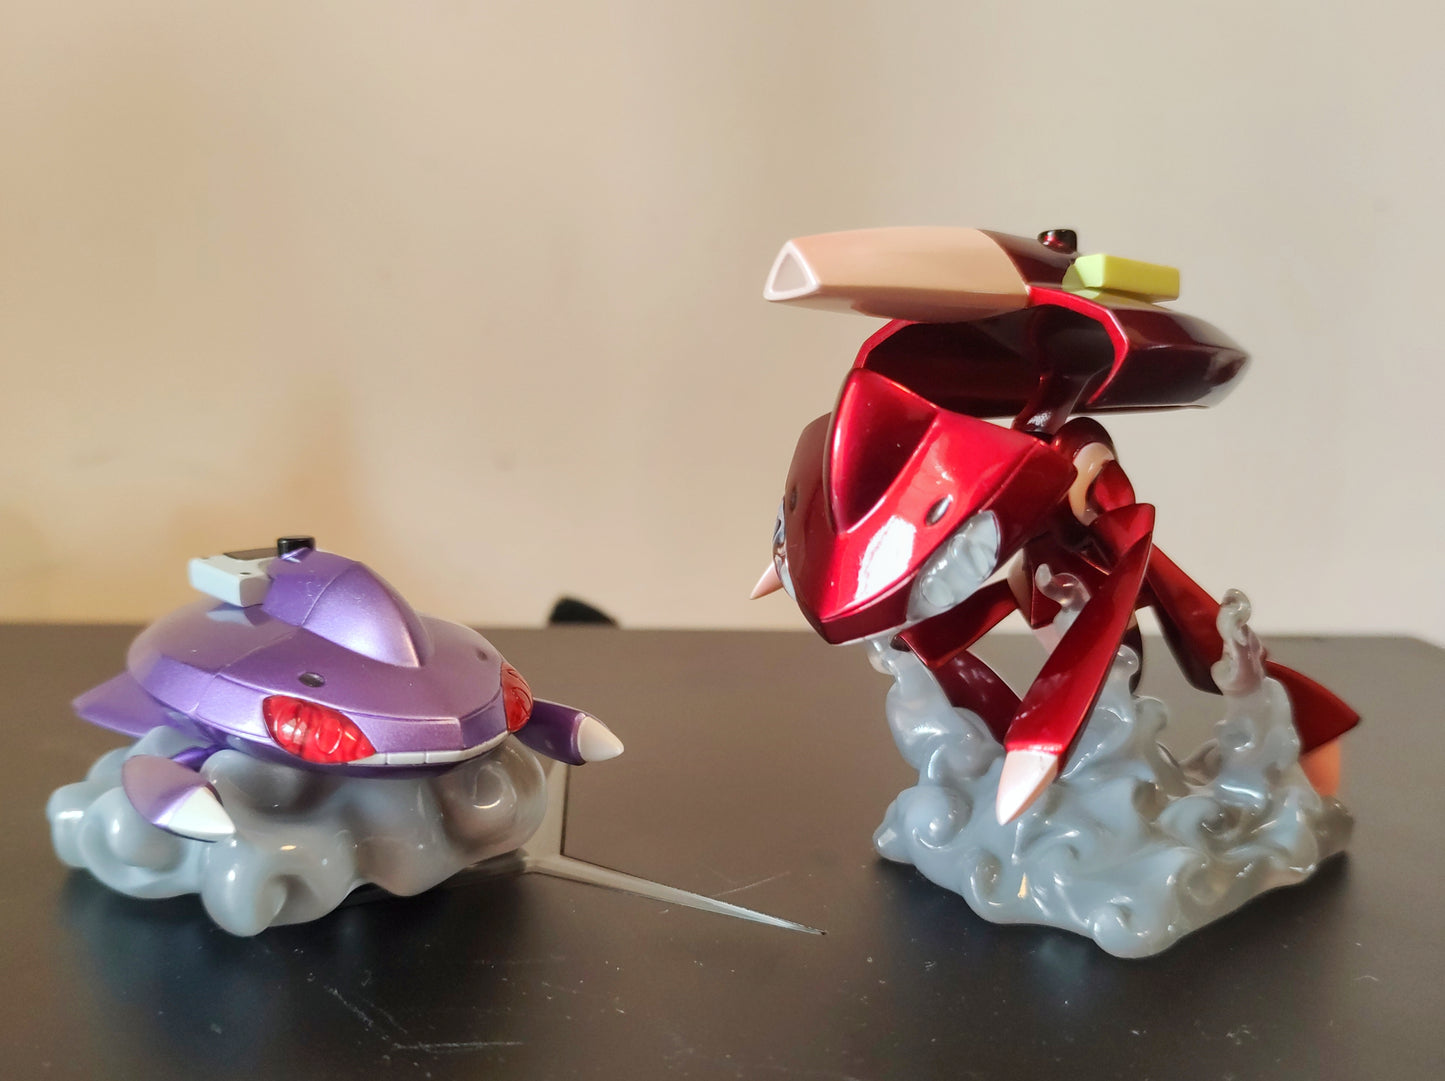 〖Sold Out〗Pokemon Scale World Genesect #649 1:20 - HH Studio